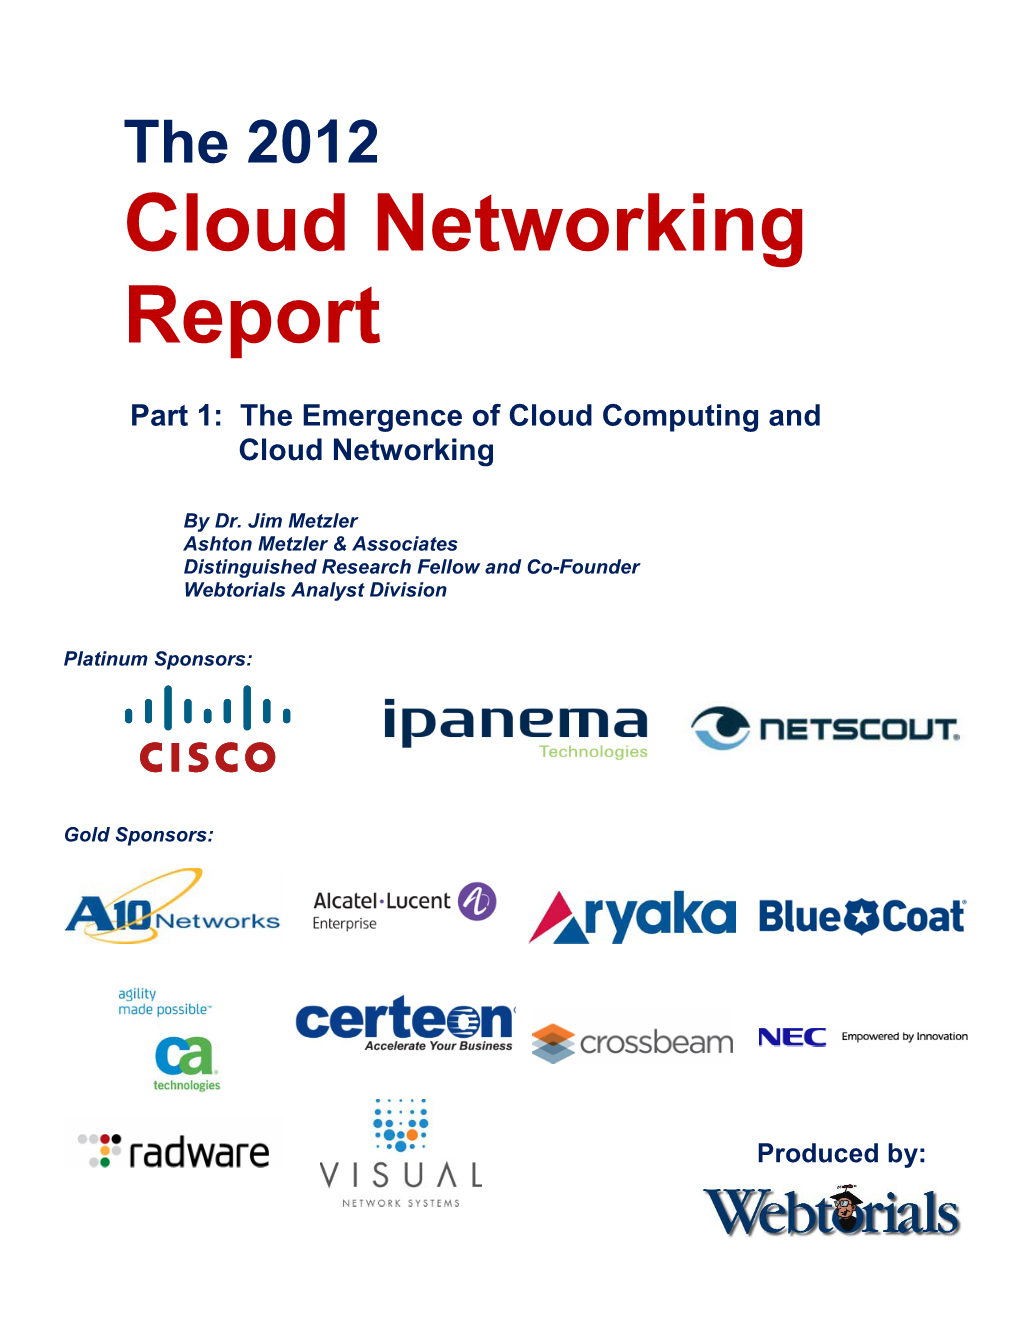 The 2012 Cloud Networking Report